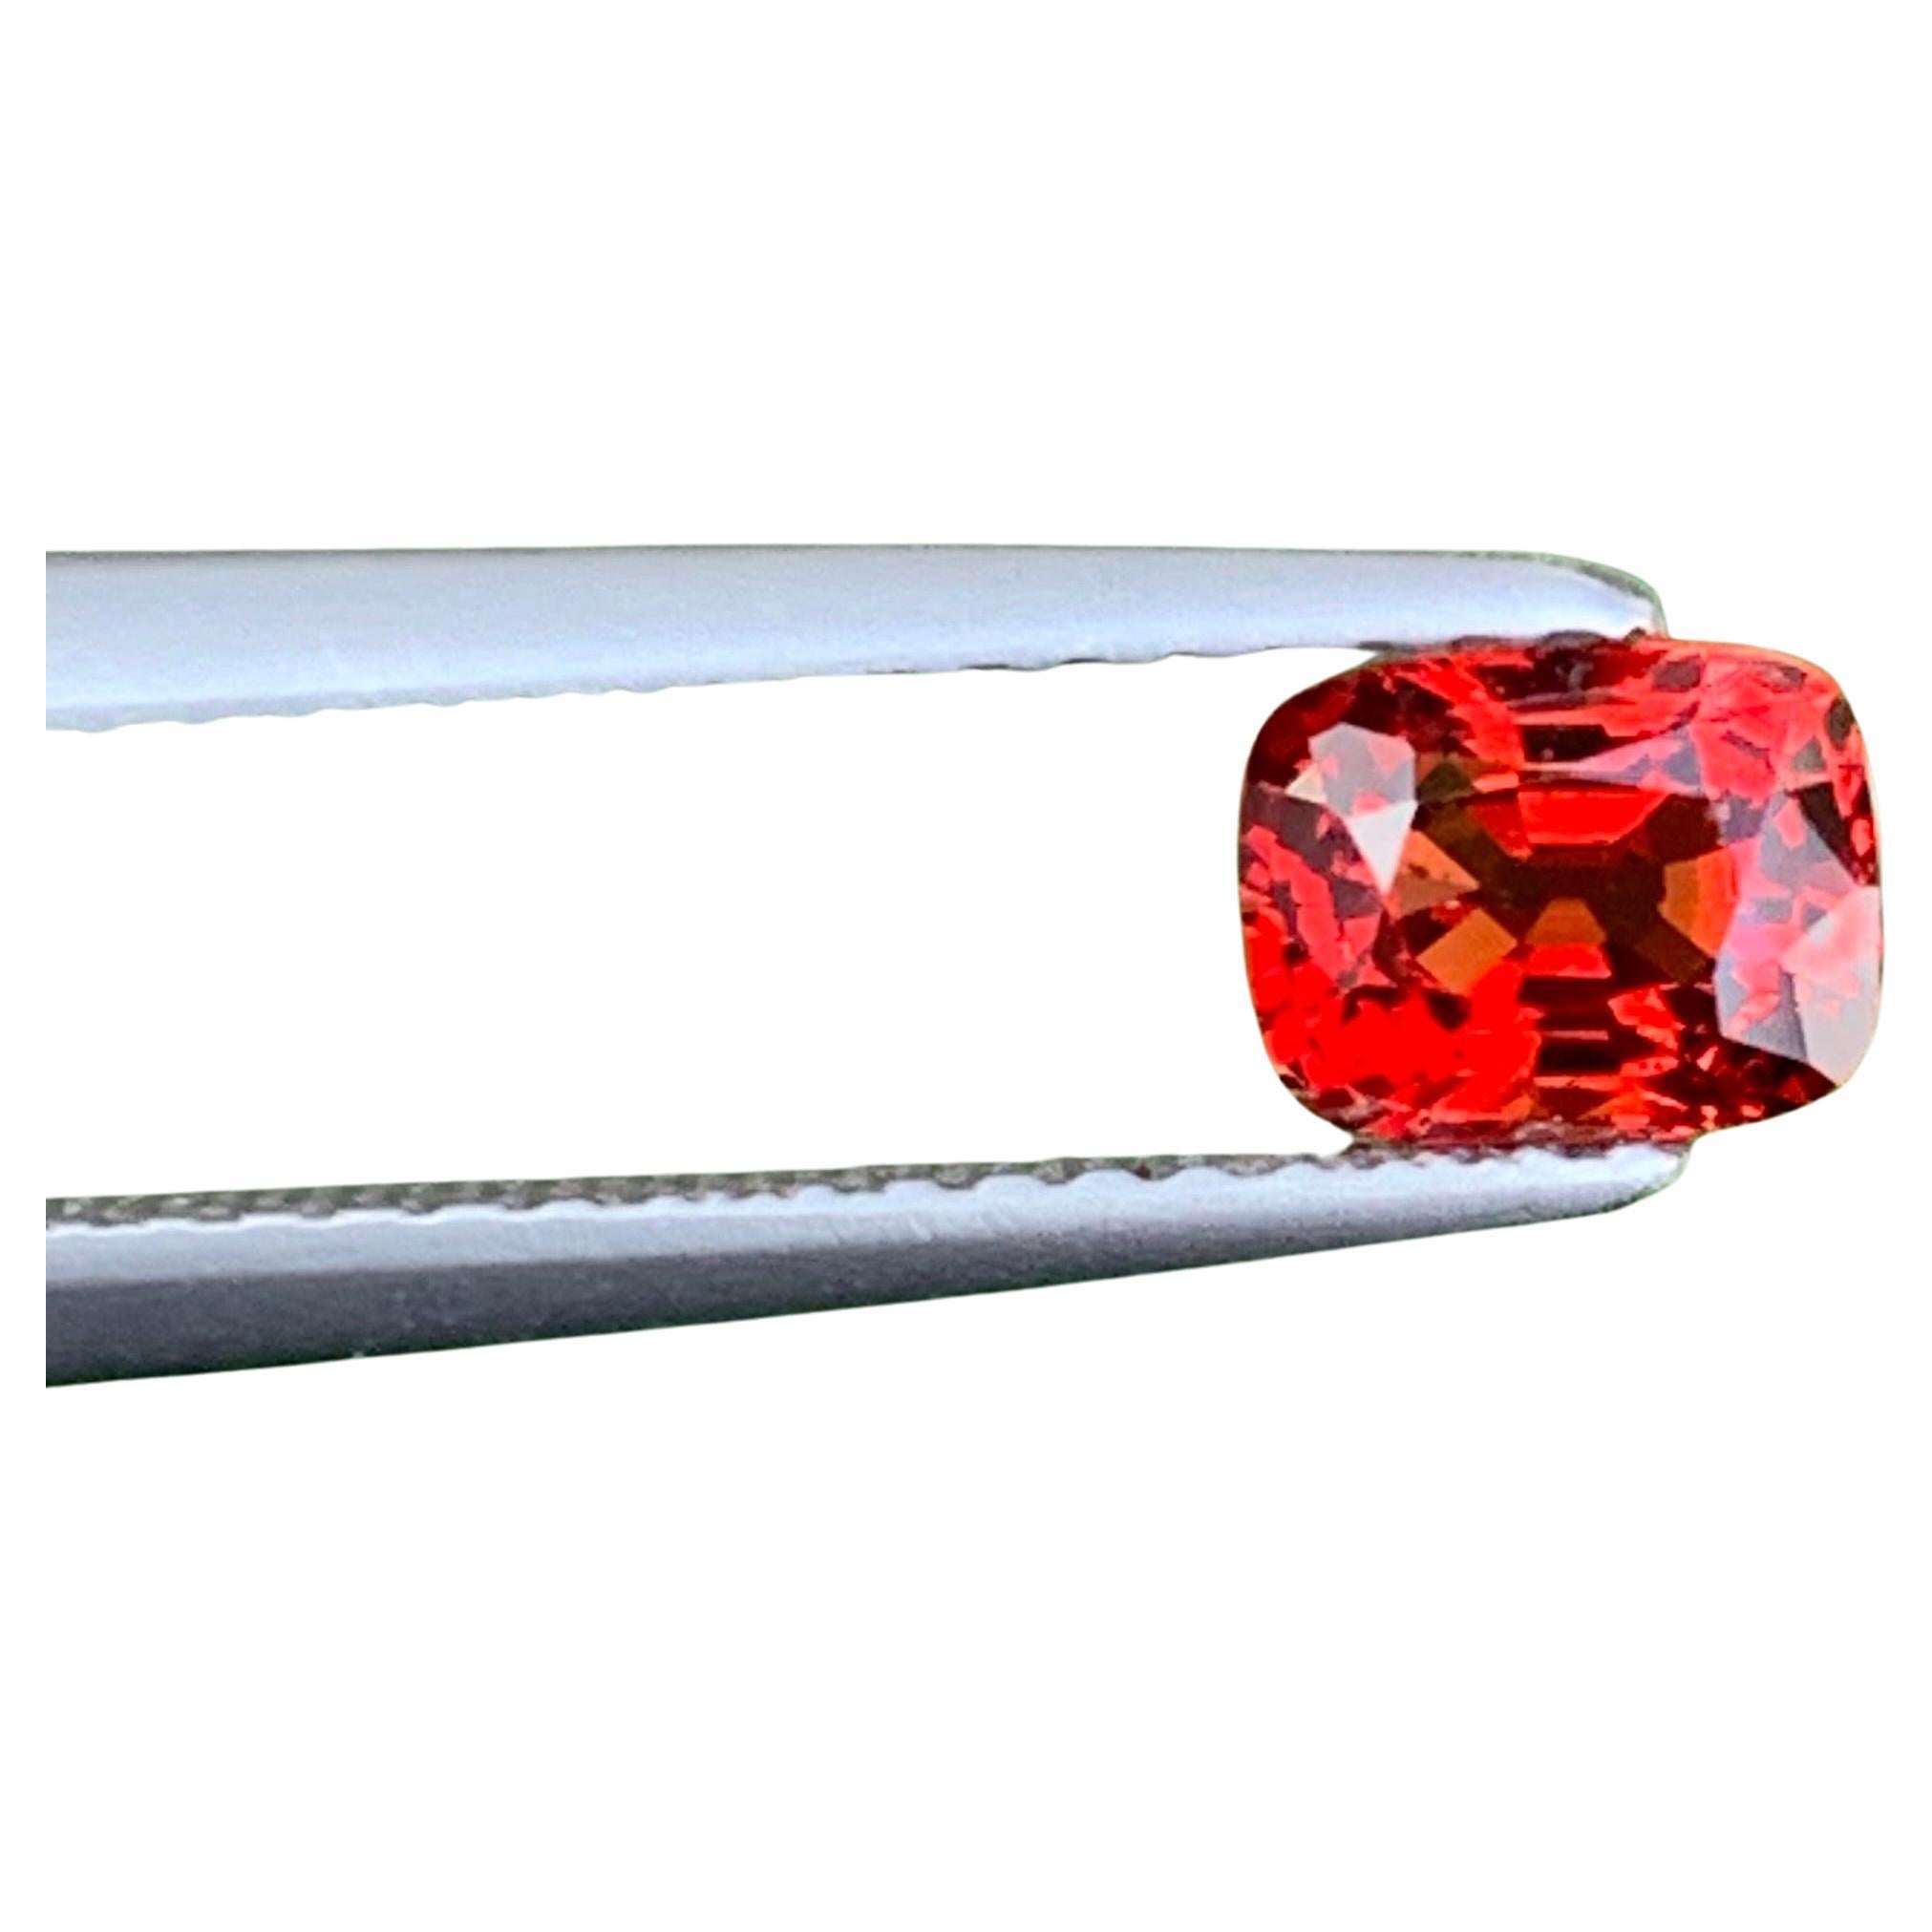 Gorgeous Loose Spinel
Weight: 0.76 Carats
Dimension: 5.81x4.45x3.38 Mm
Origin: Burma
Color: Red
Shape: Cushion
Treatment: Non
Certificate : Available
.
Spinel gems are said to help set aside egos and become devoted to another person. Like most fiery